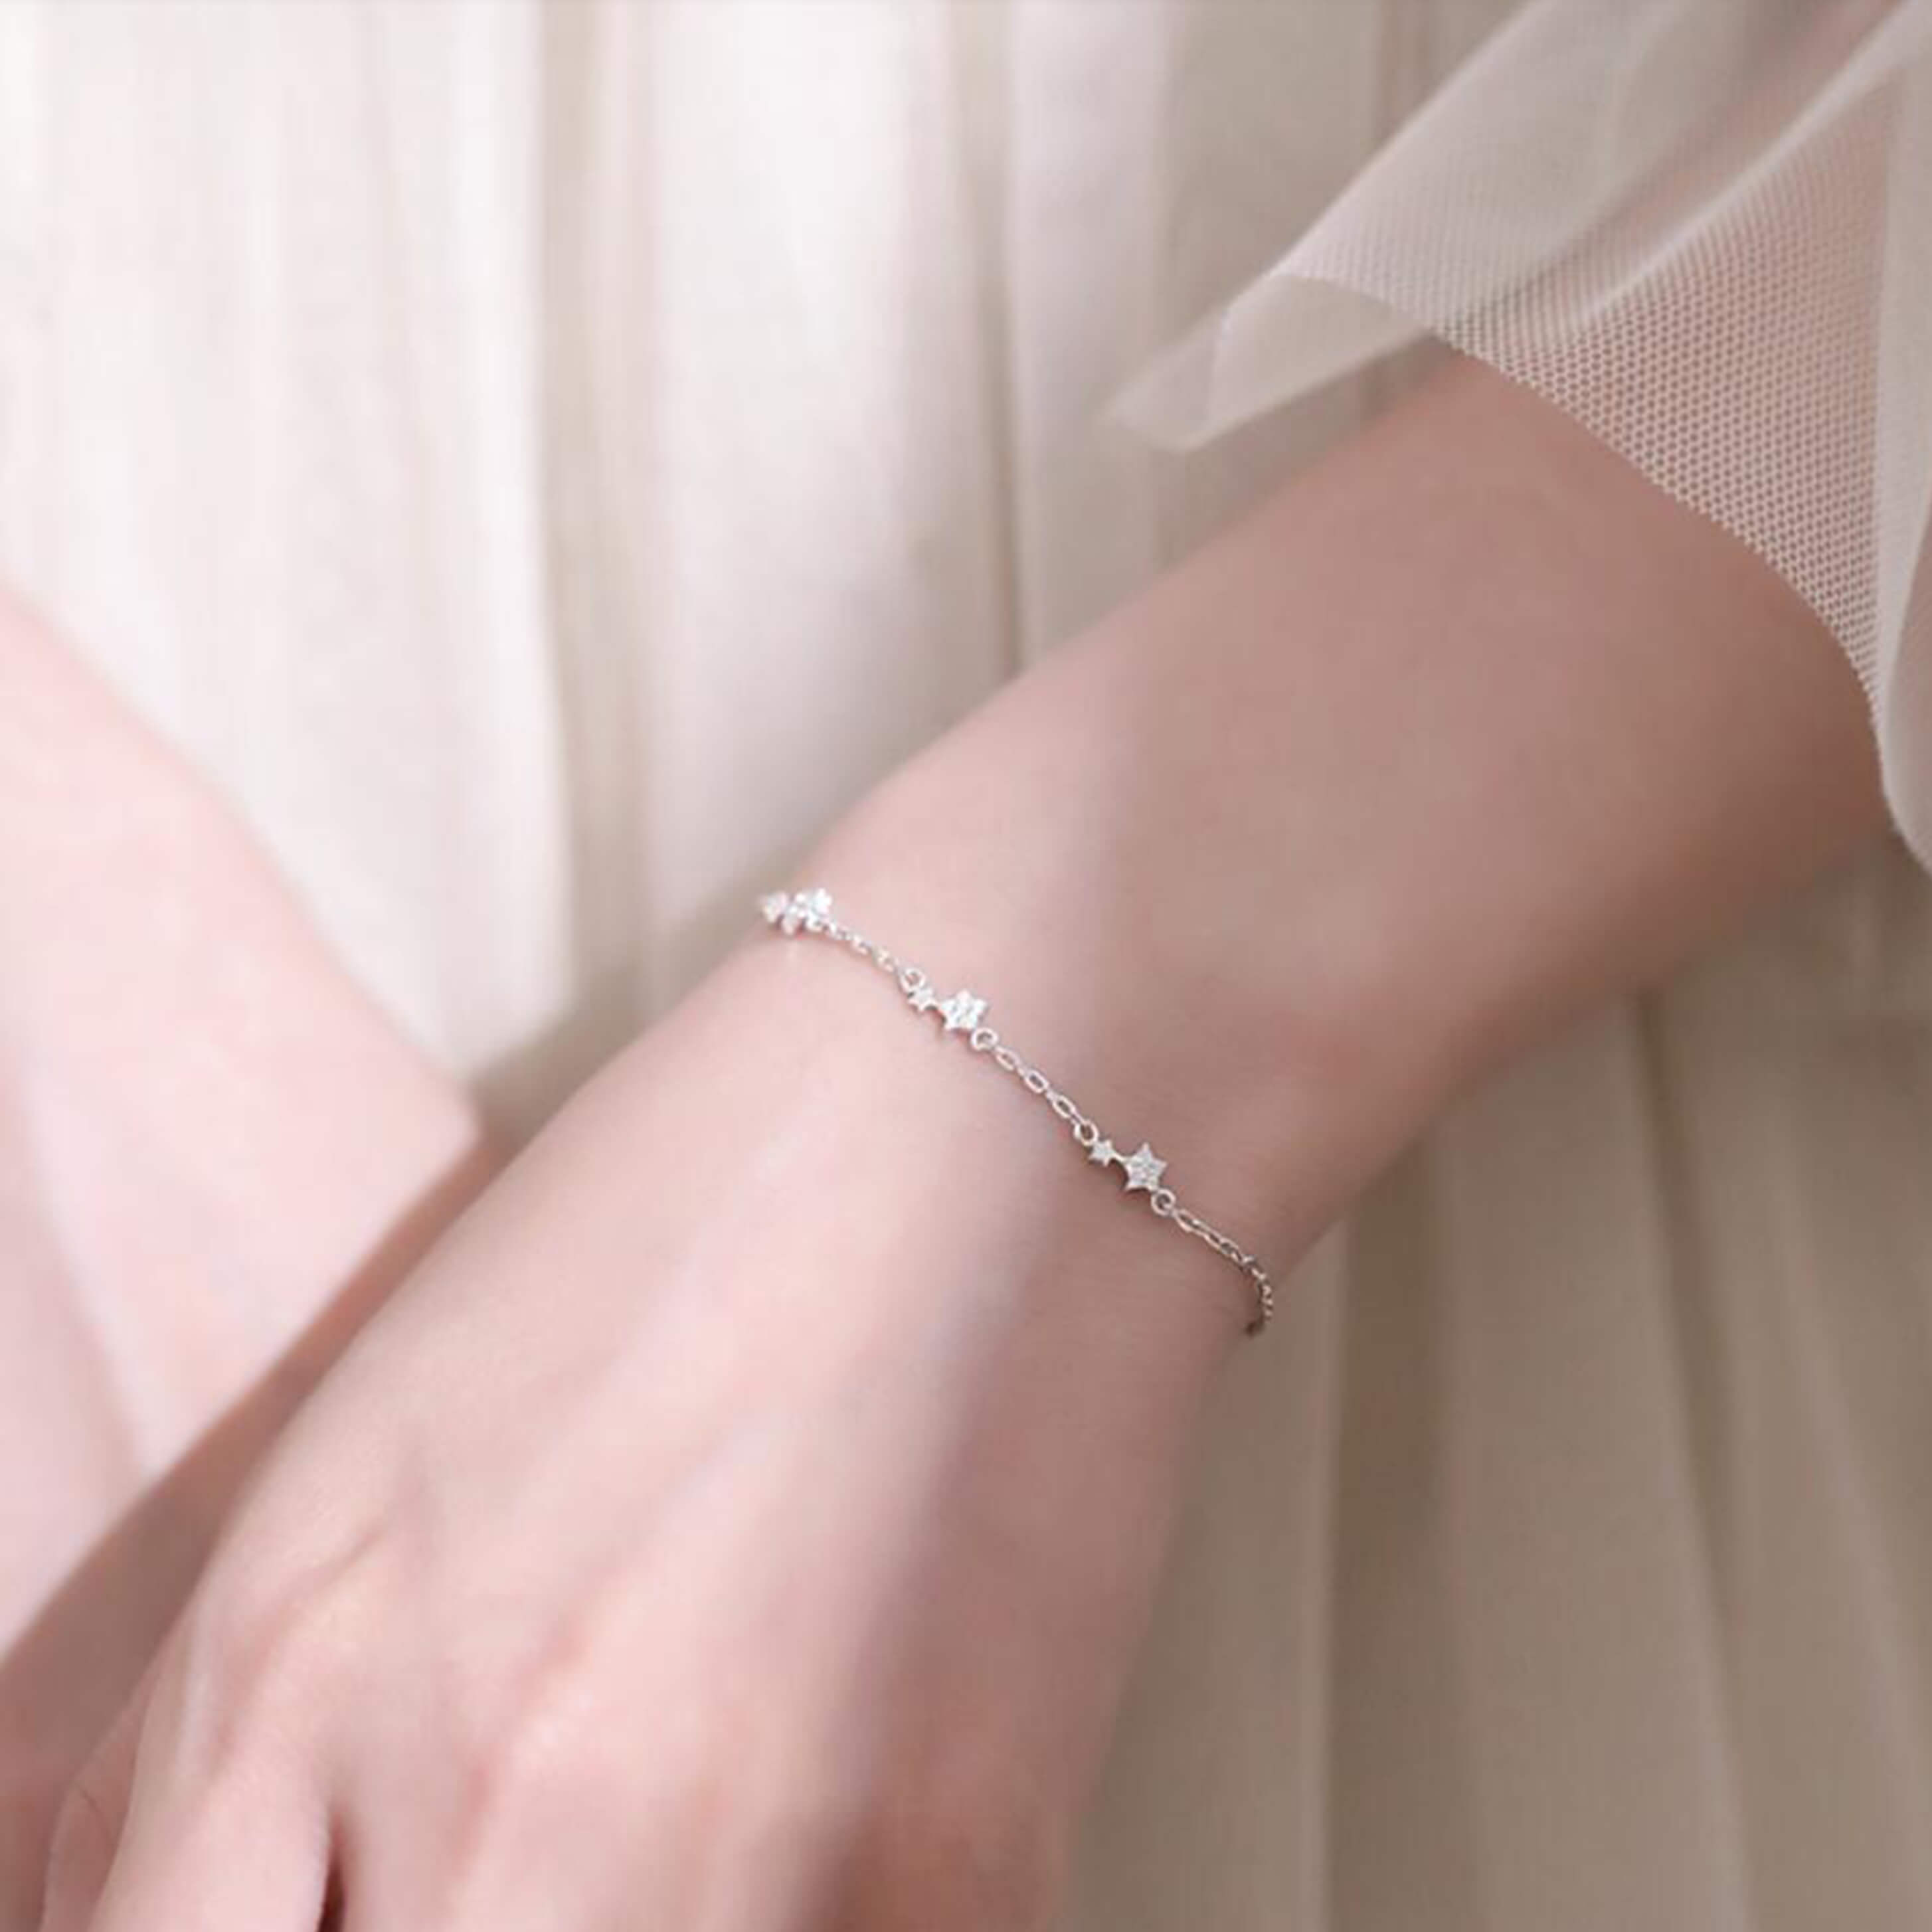 Delicate Pearl Silver Bracelet and Cuore Pearl Silver Bracelet, sweet and  stylish, features a dainty heart and oval charm alongside… | Instagram